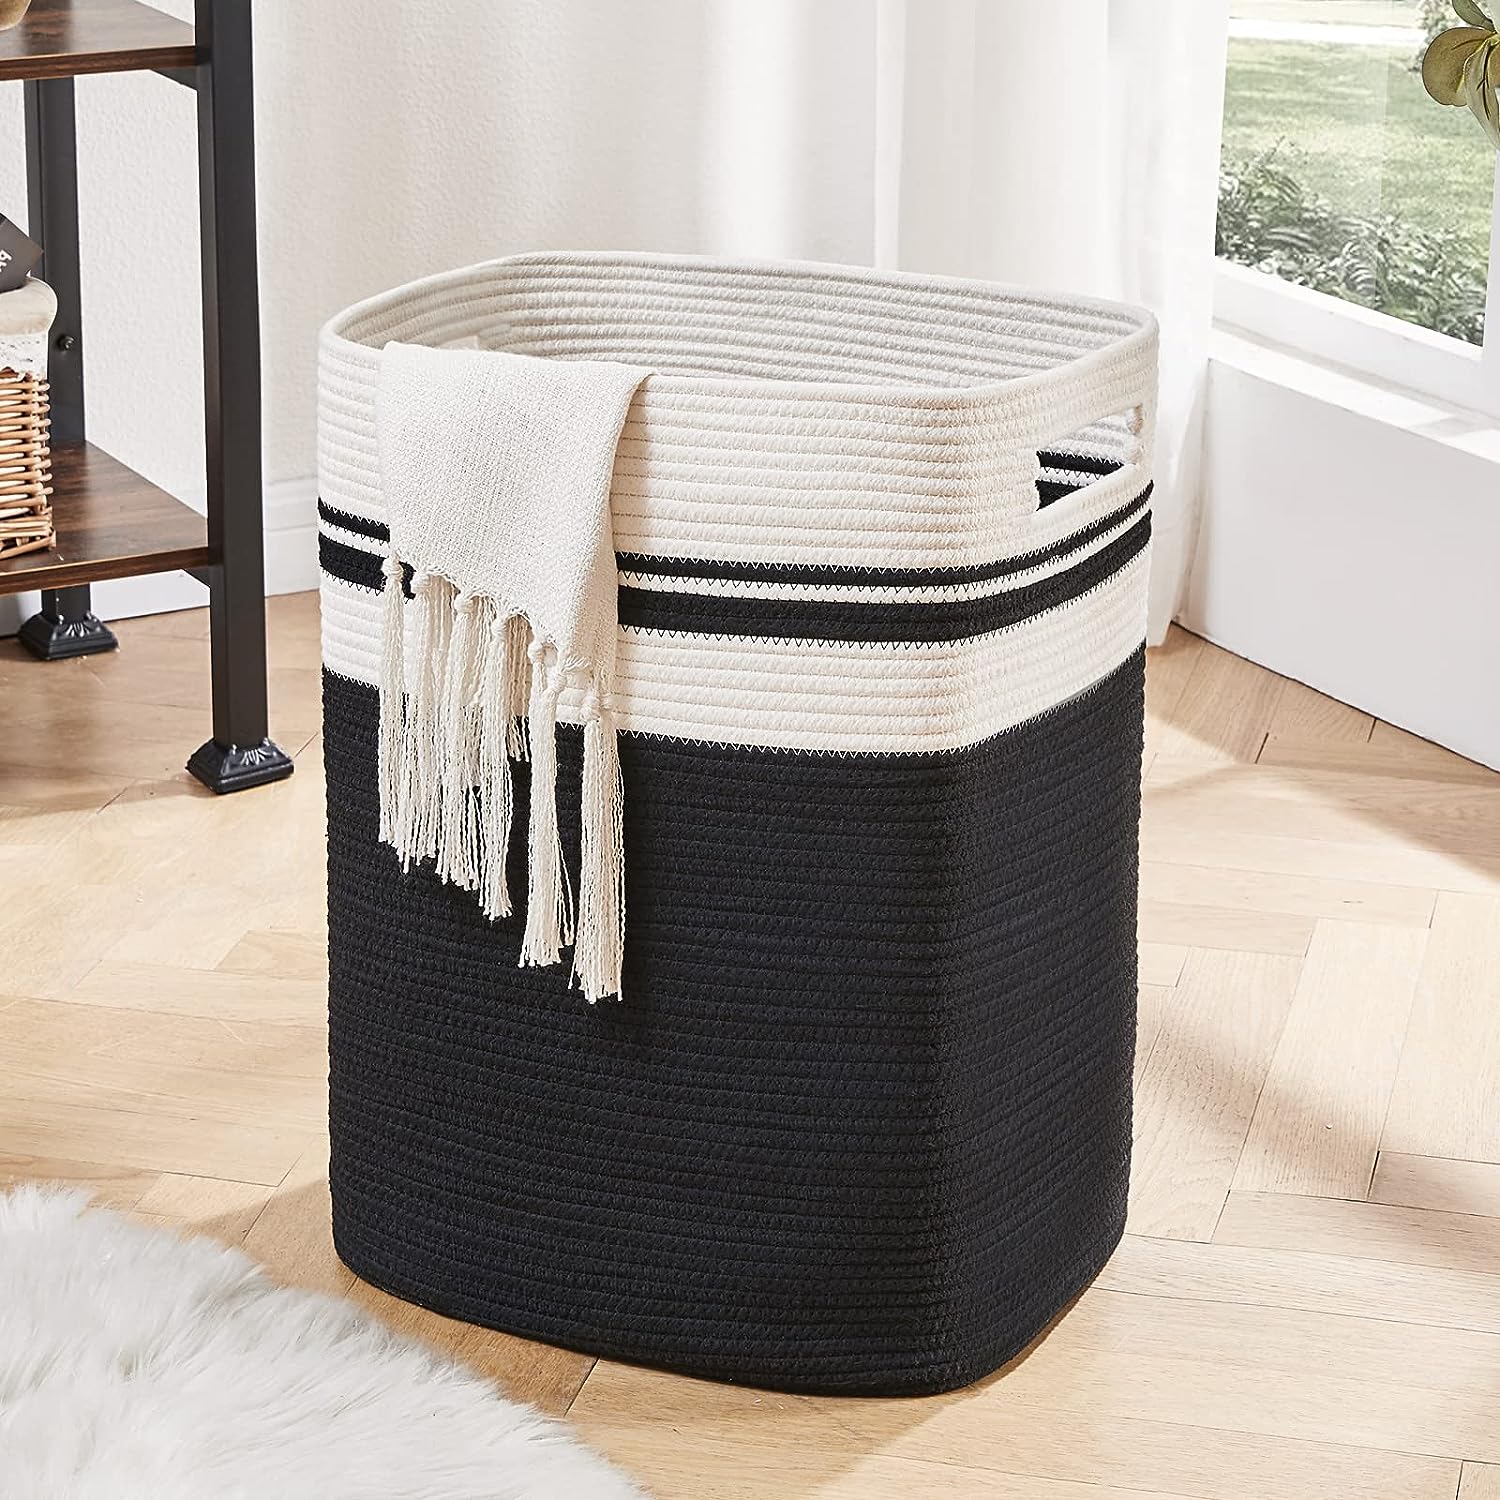 Blushbees® Collapsible Laundry Hamper - Gray, 16x13x22In